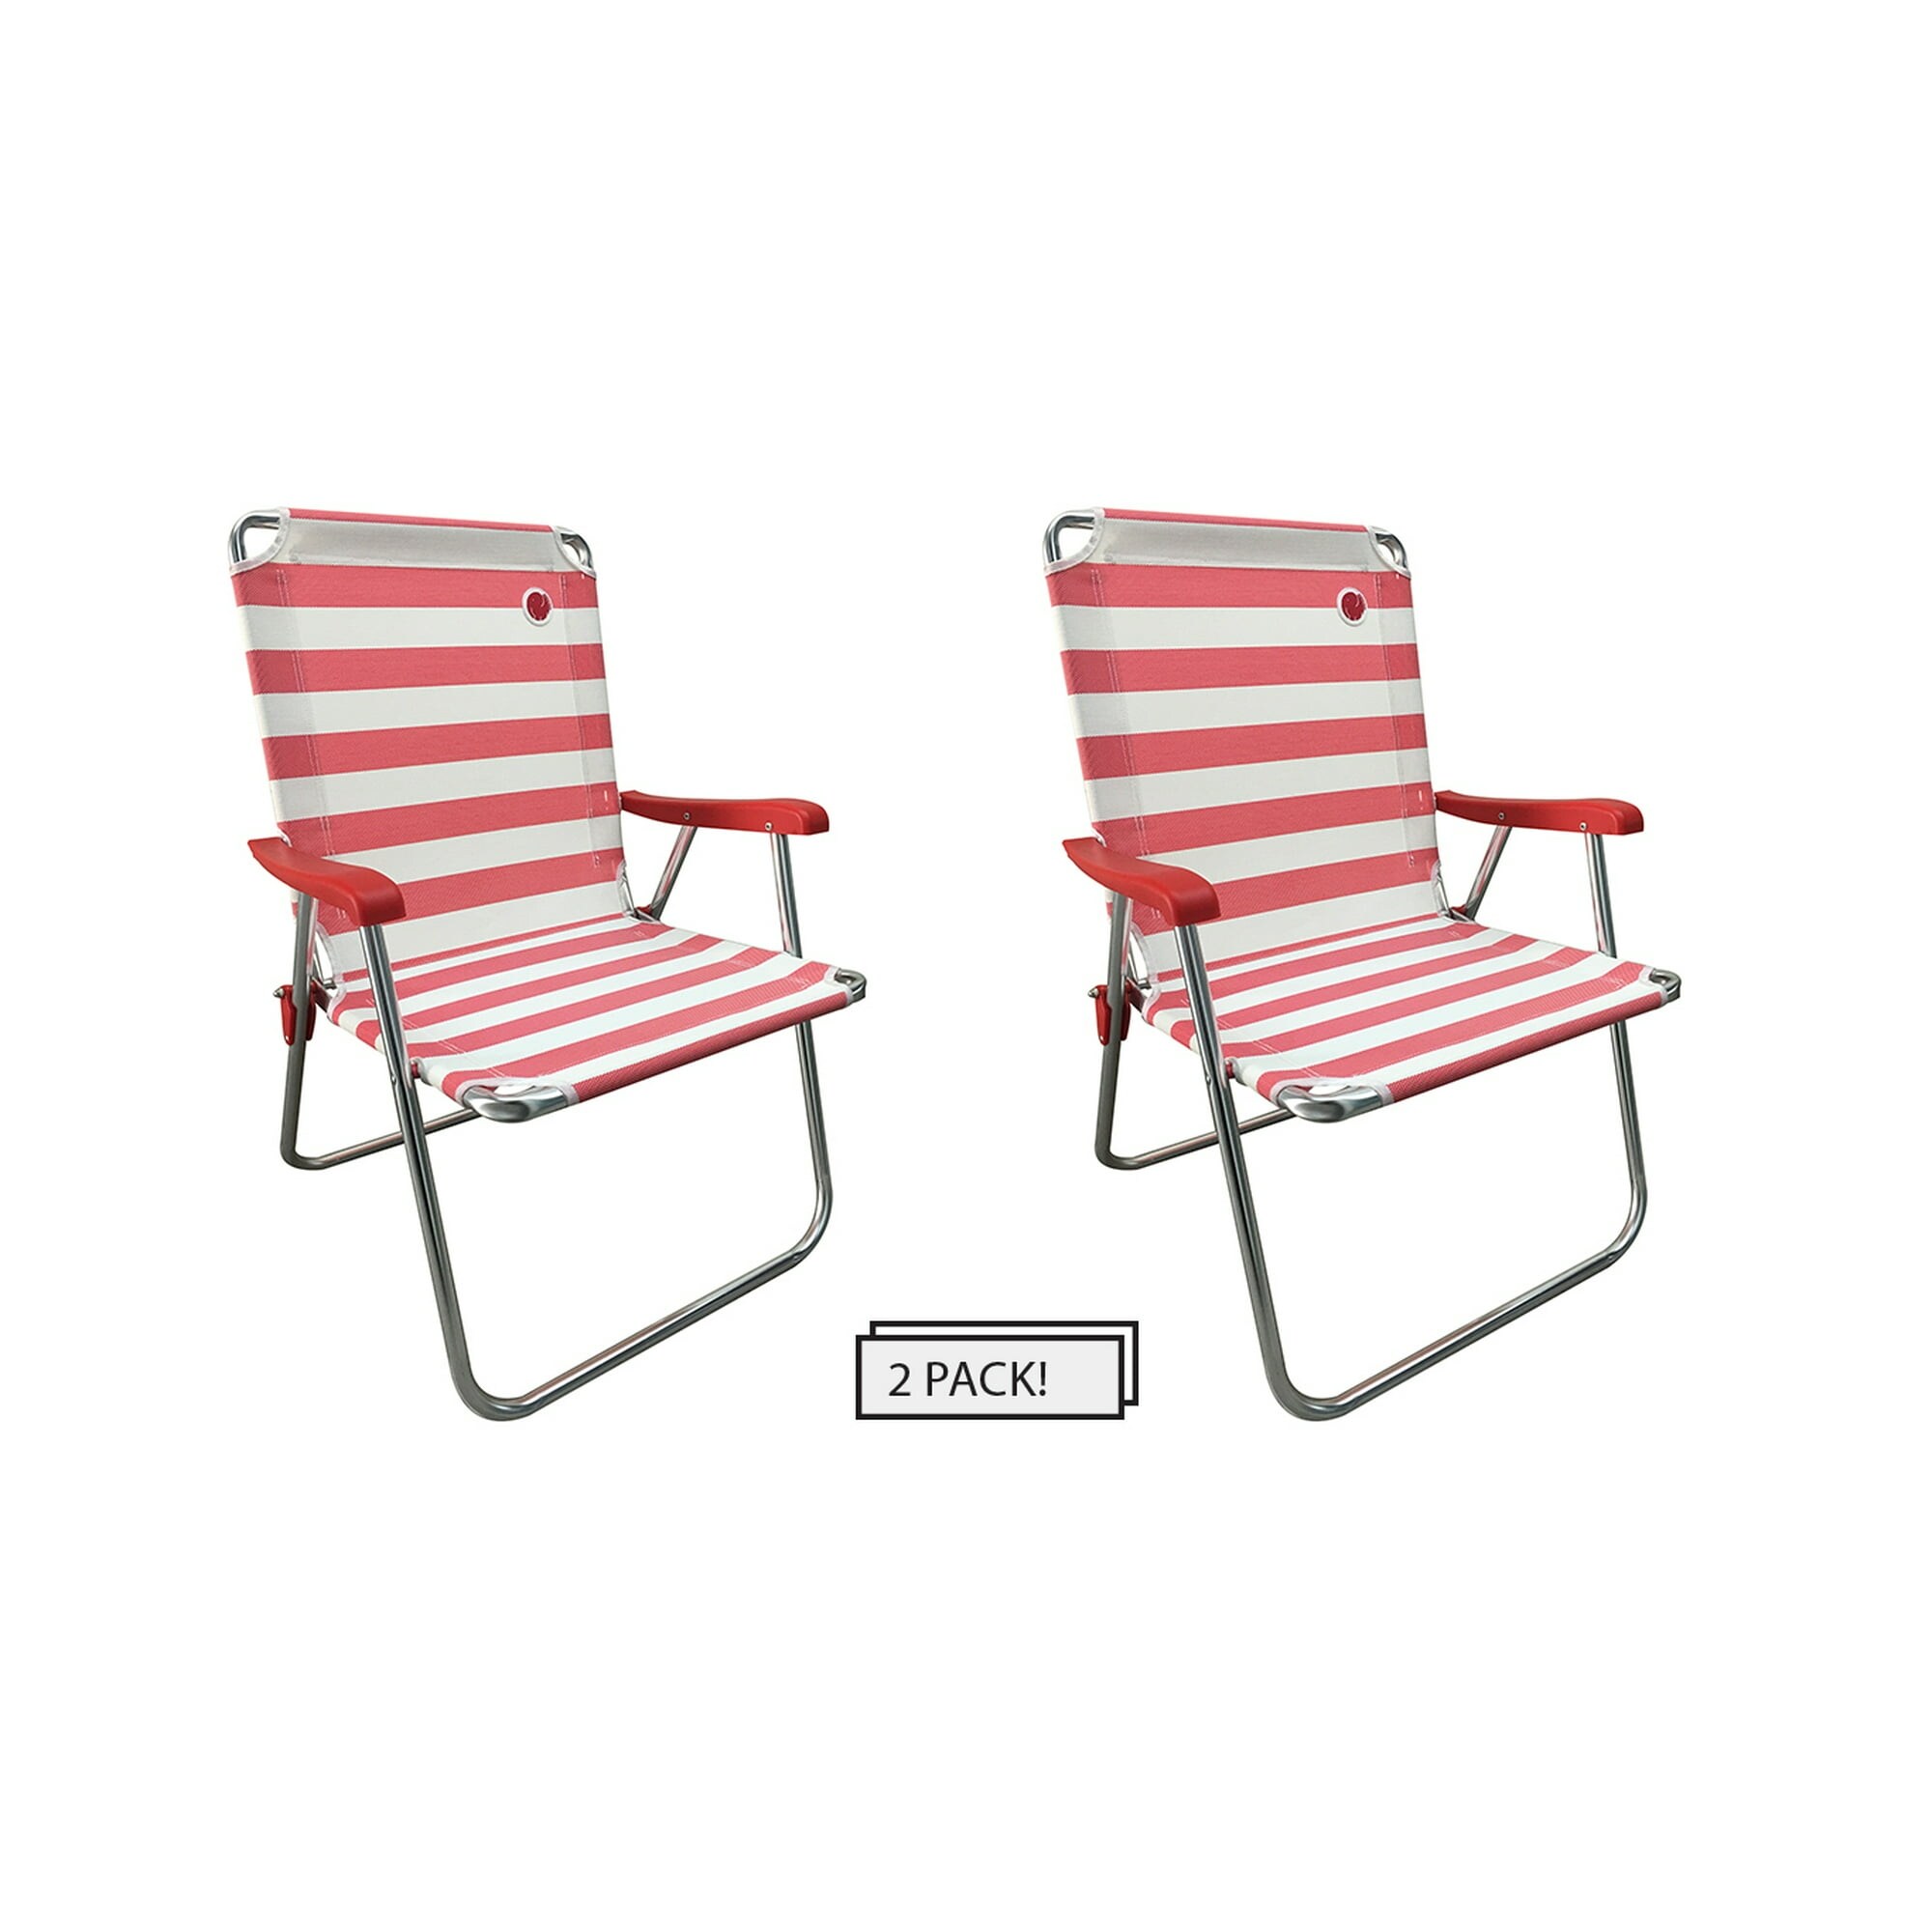 Folding Camp/lawn Chair (2 Pack)